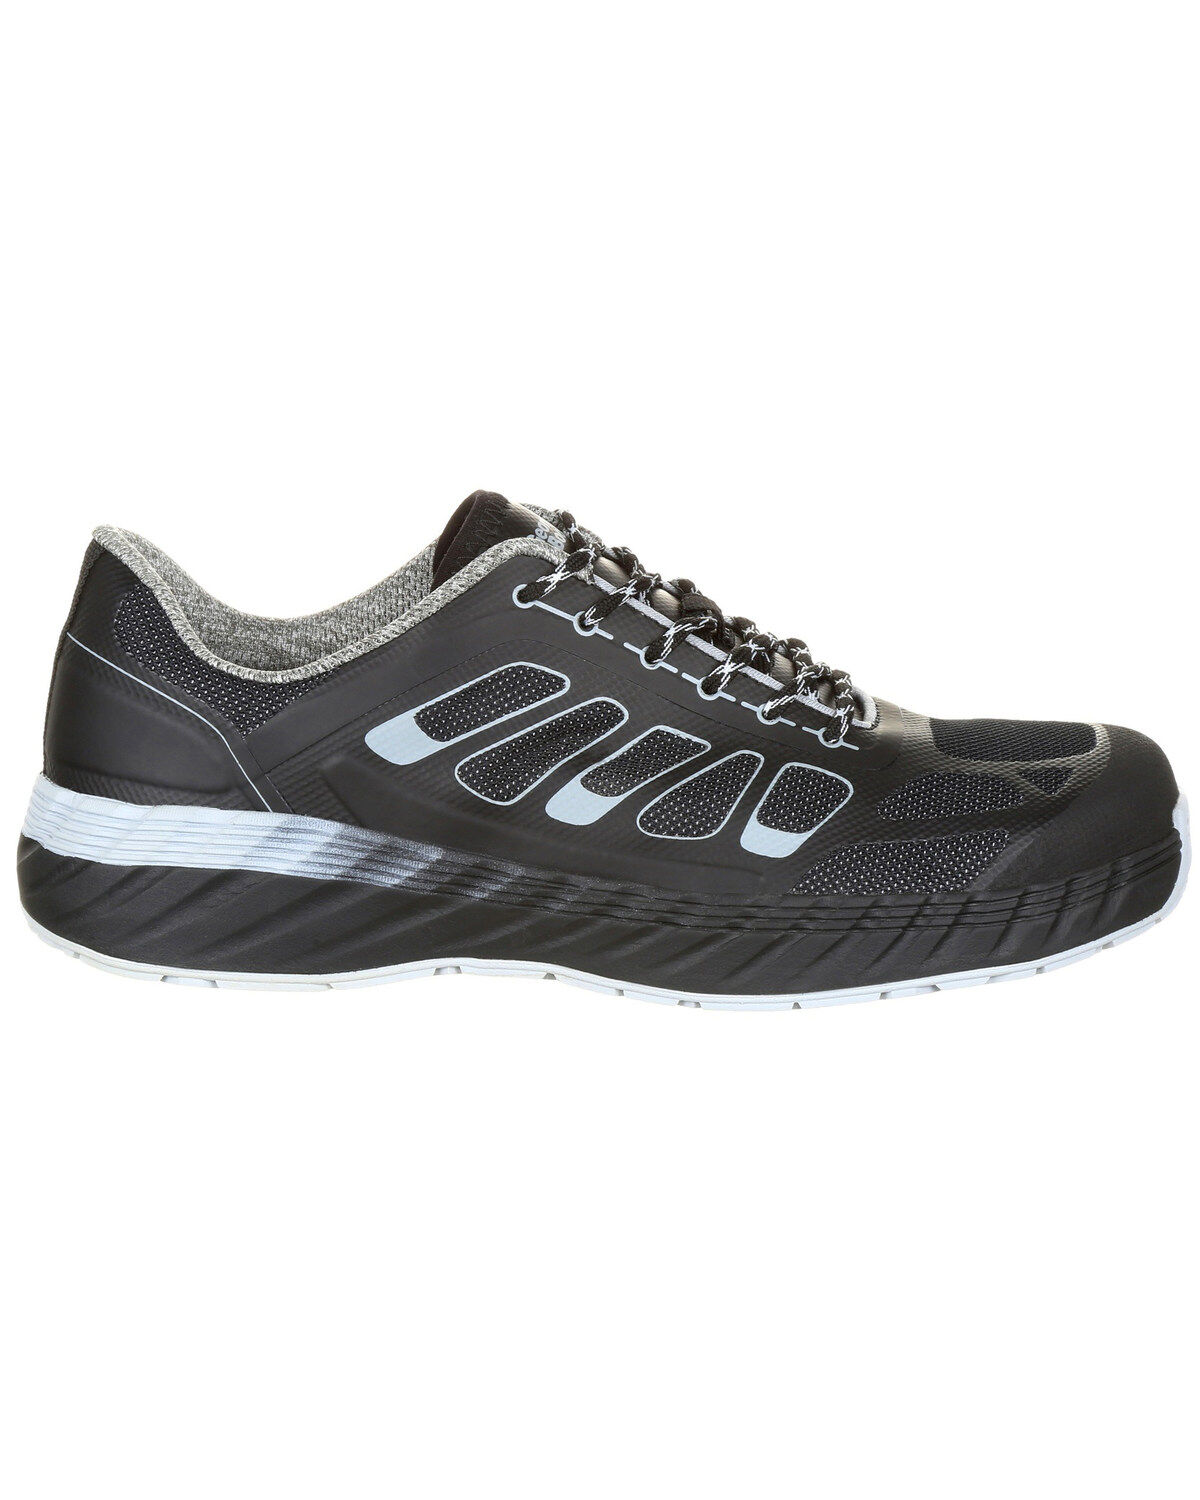 alloy toe athletic shoes